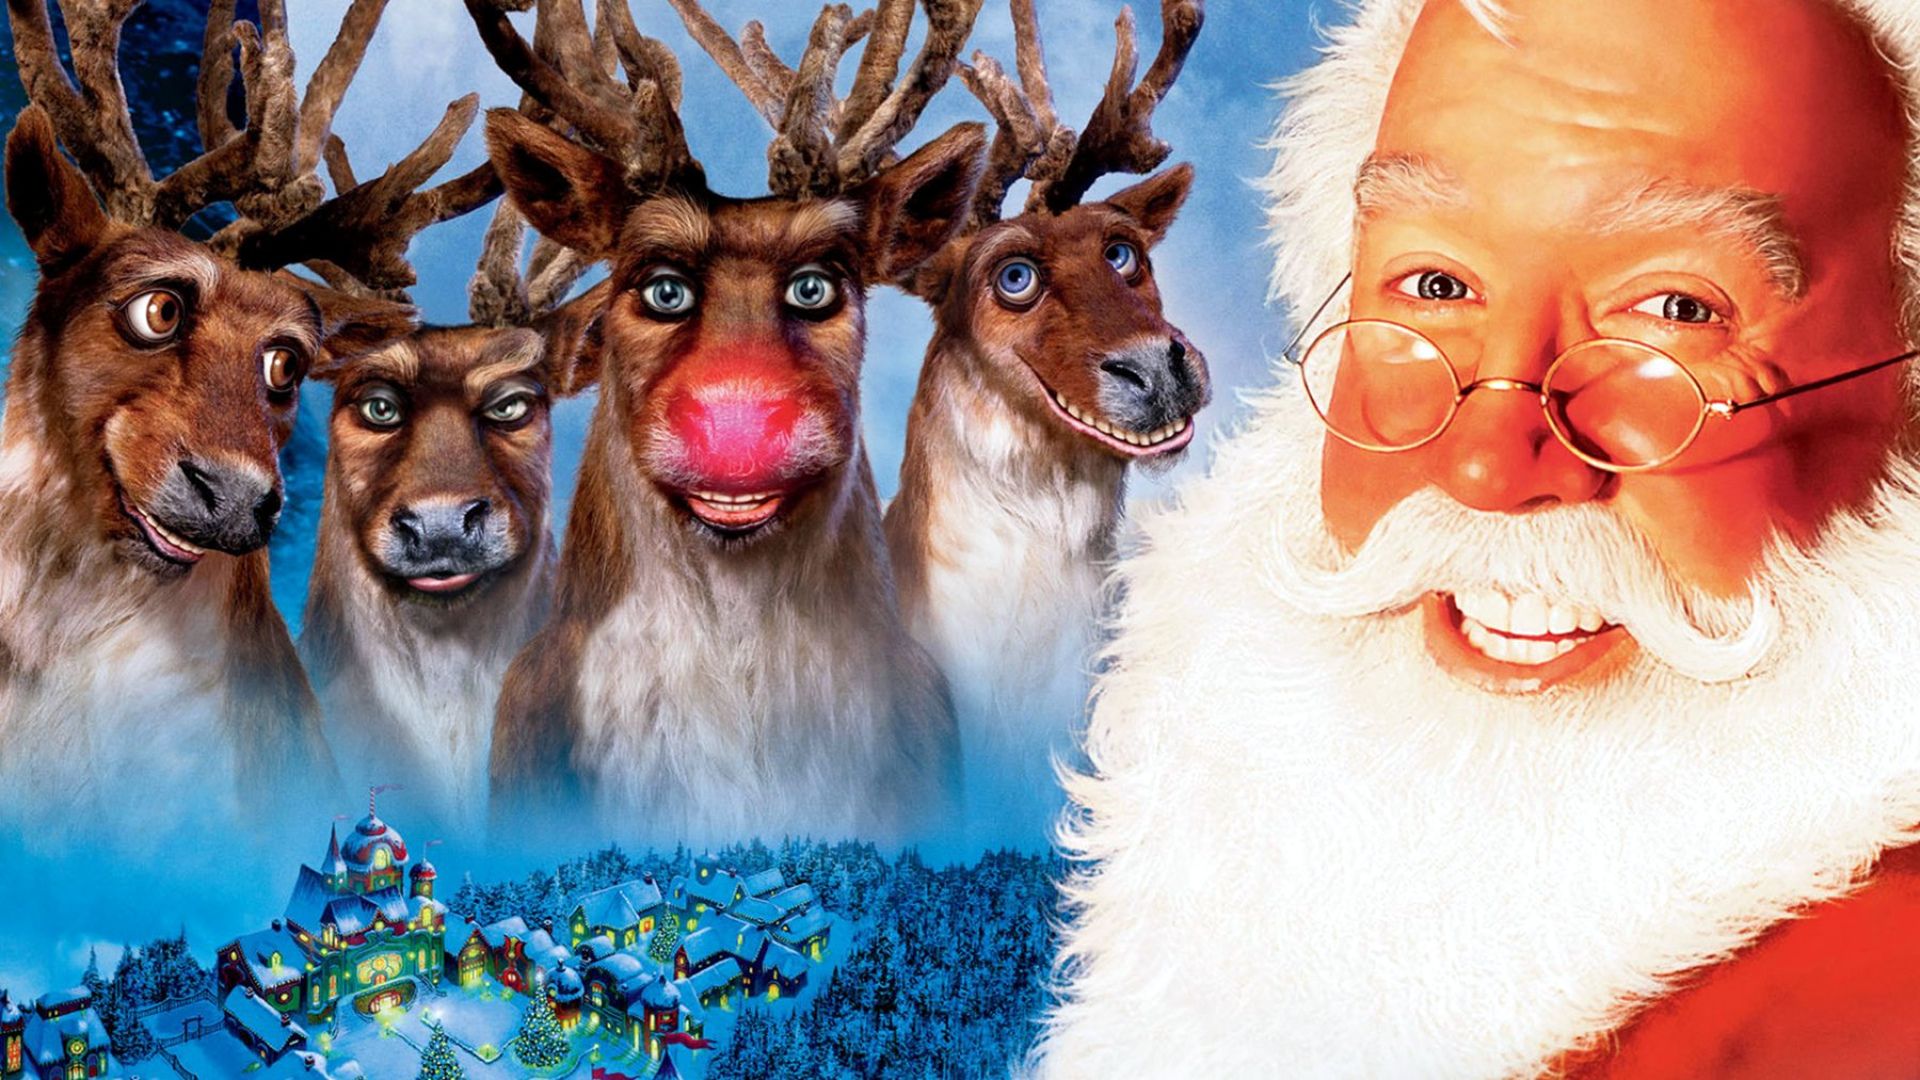 The Santa Clause 2 background